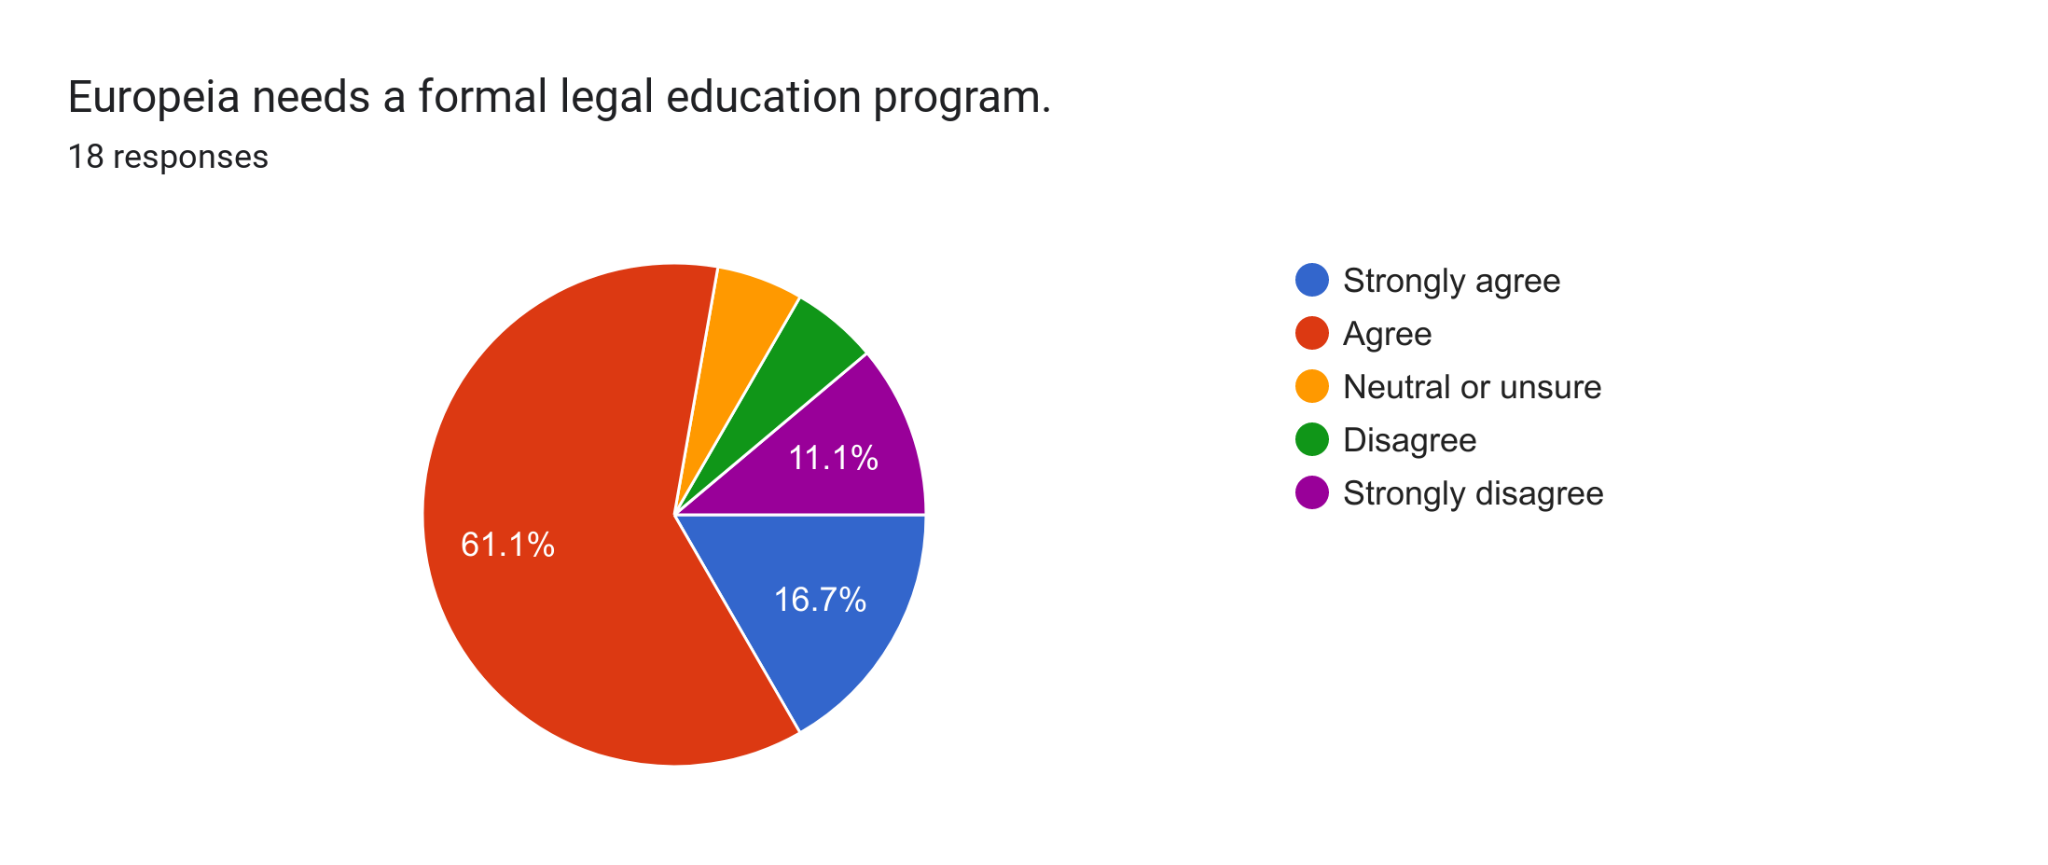 Forms response chart. Question title: Europeia needs a formal legal education program.. Number of responses: 18 responses.